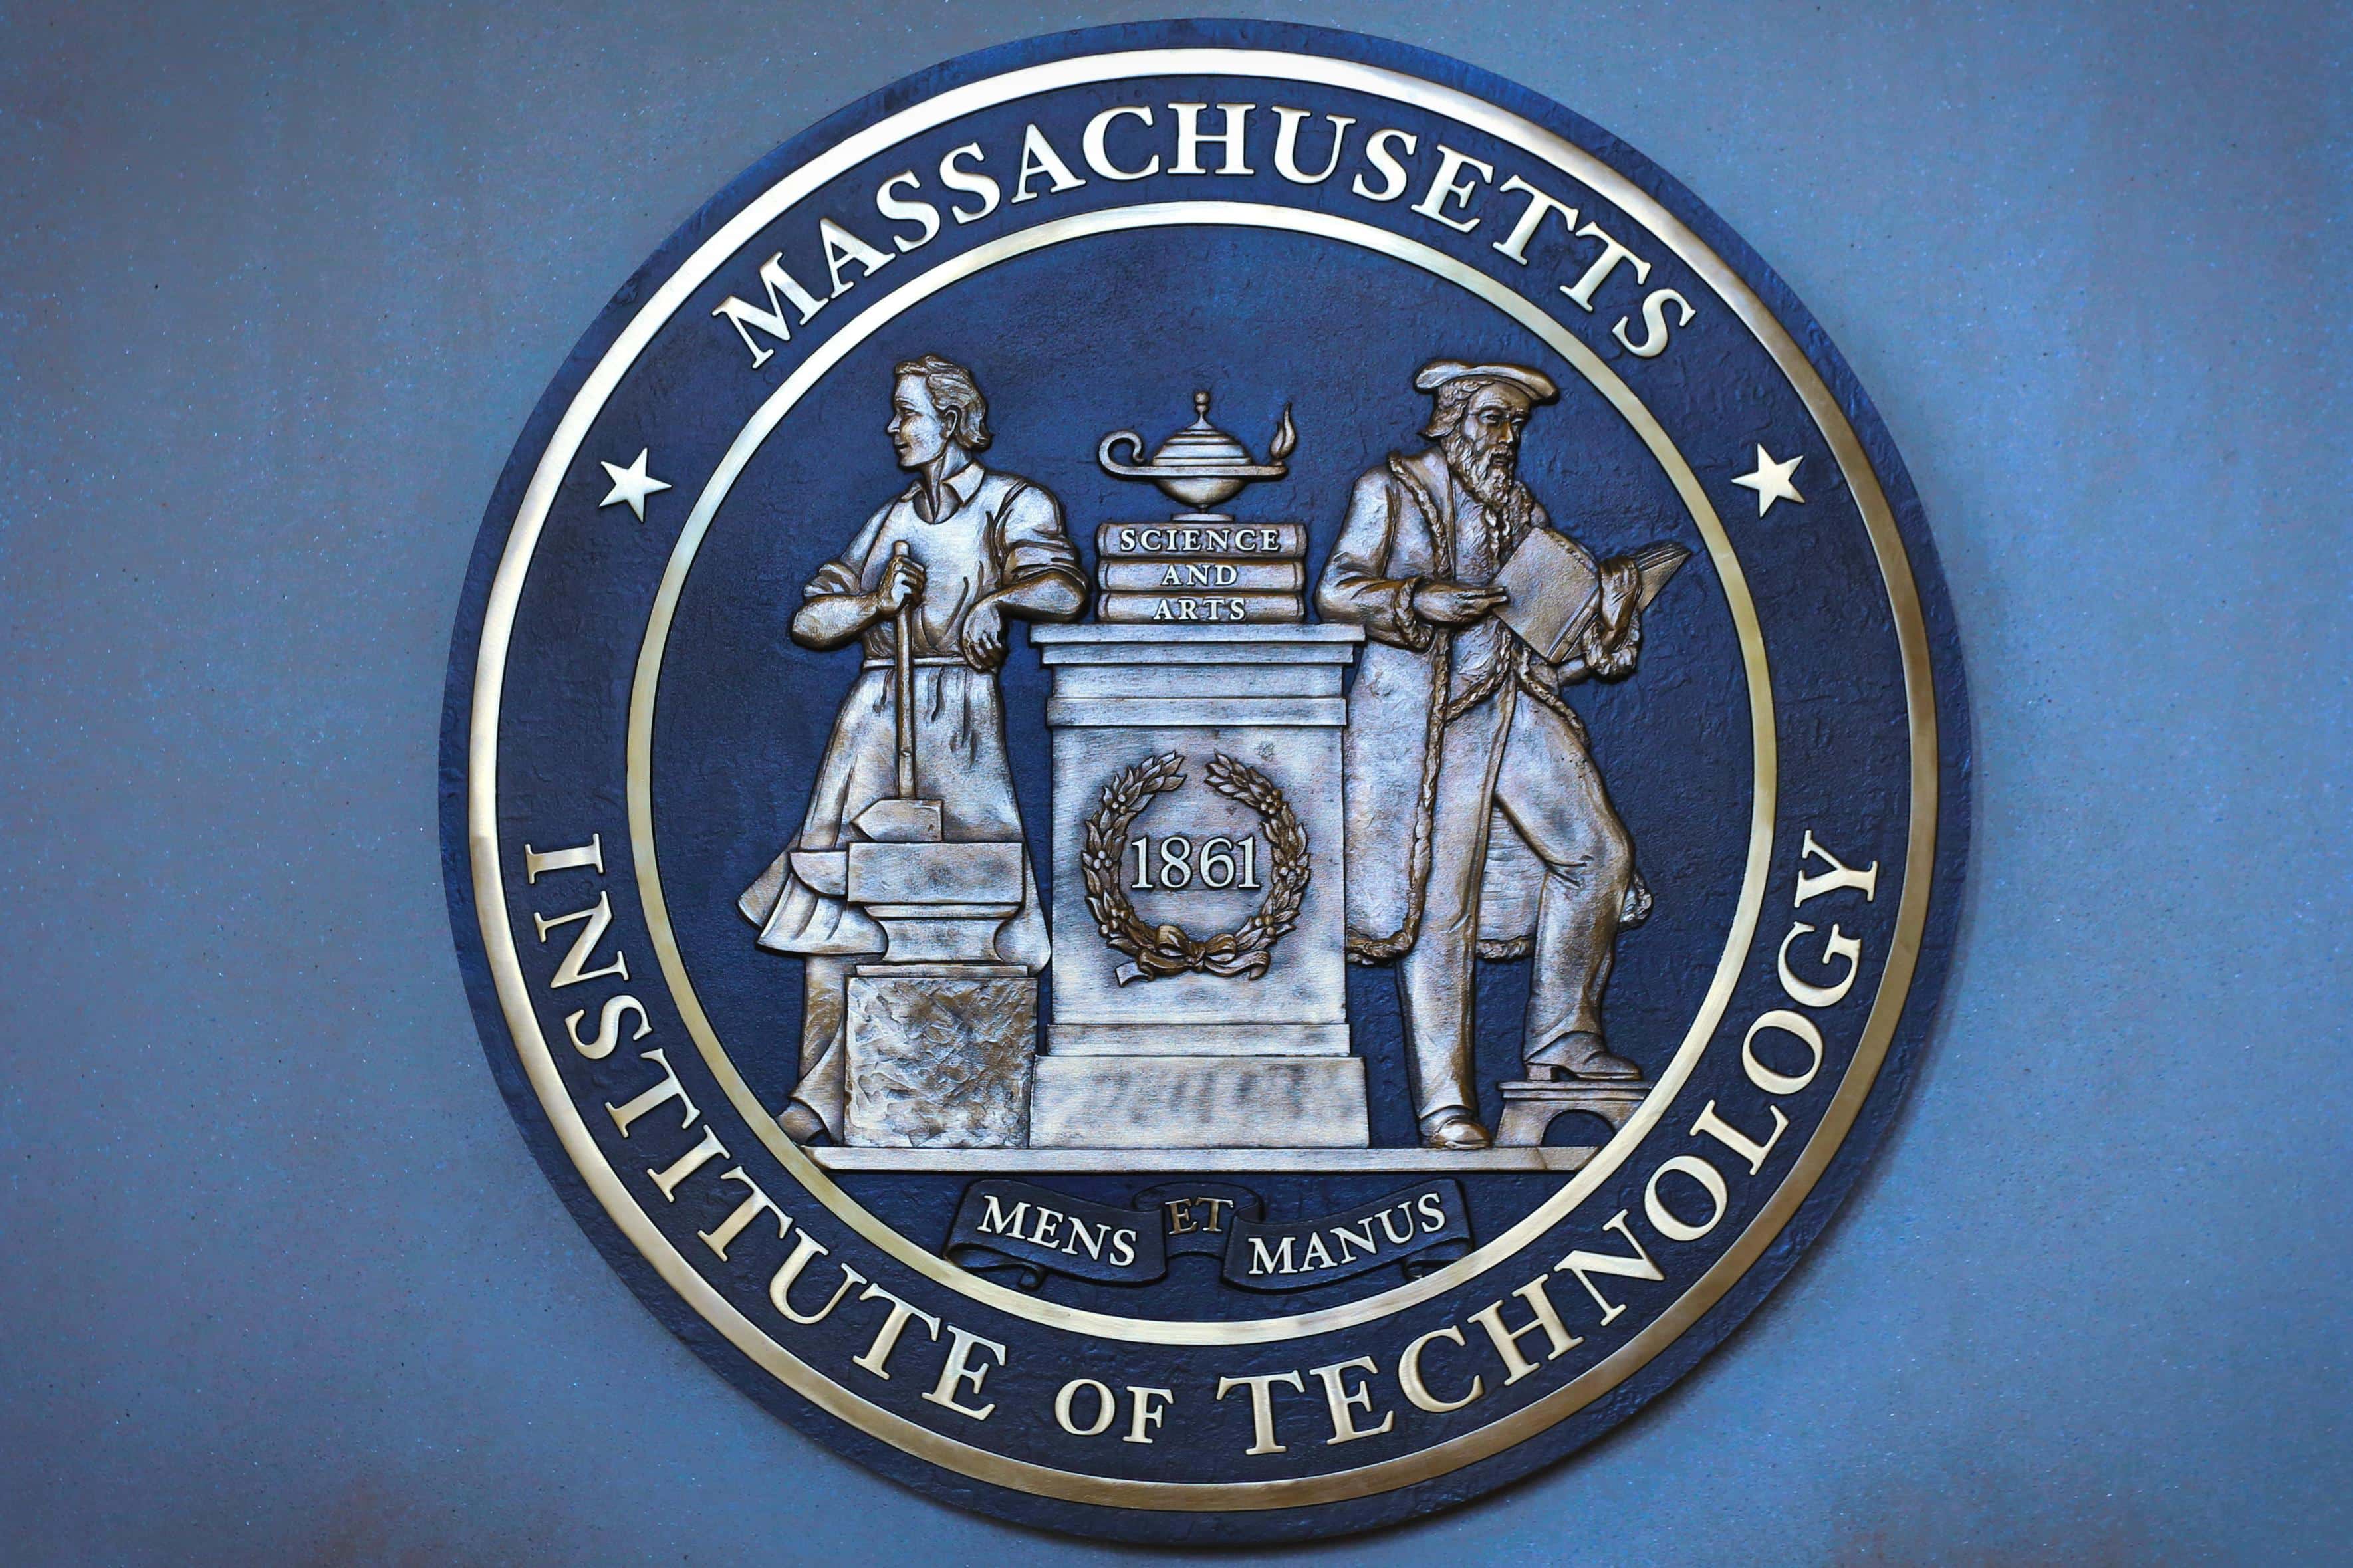 Boston, USA - August 24, 2015: the logog of the The MIT, Massachusetts Institute of Technology is a prestigious American private research university